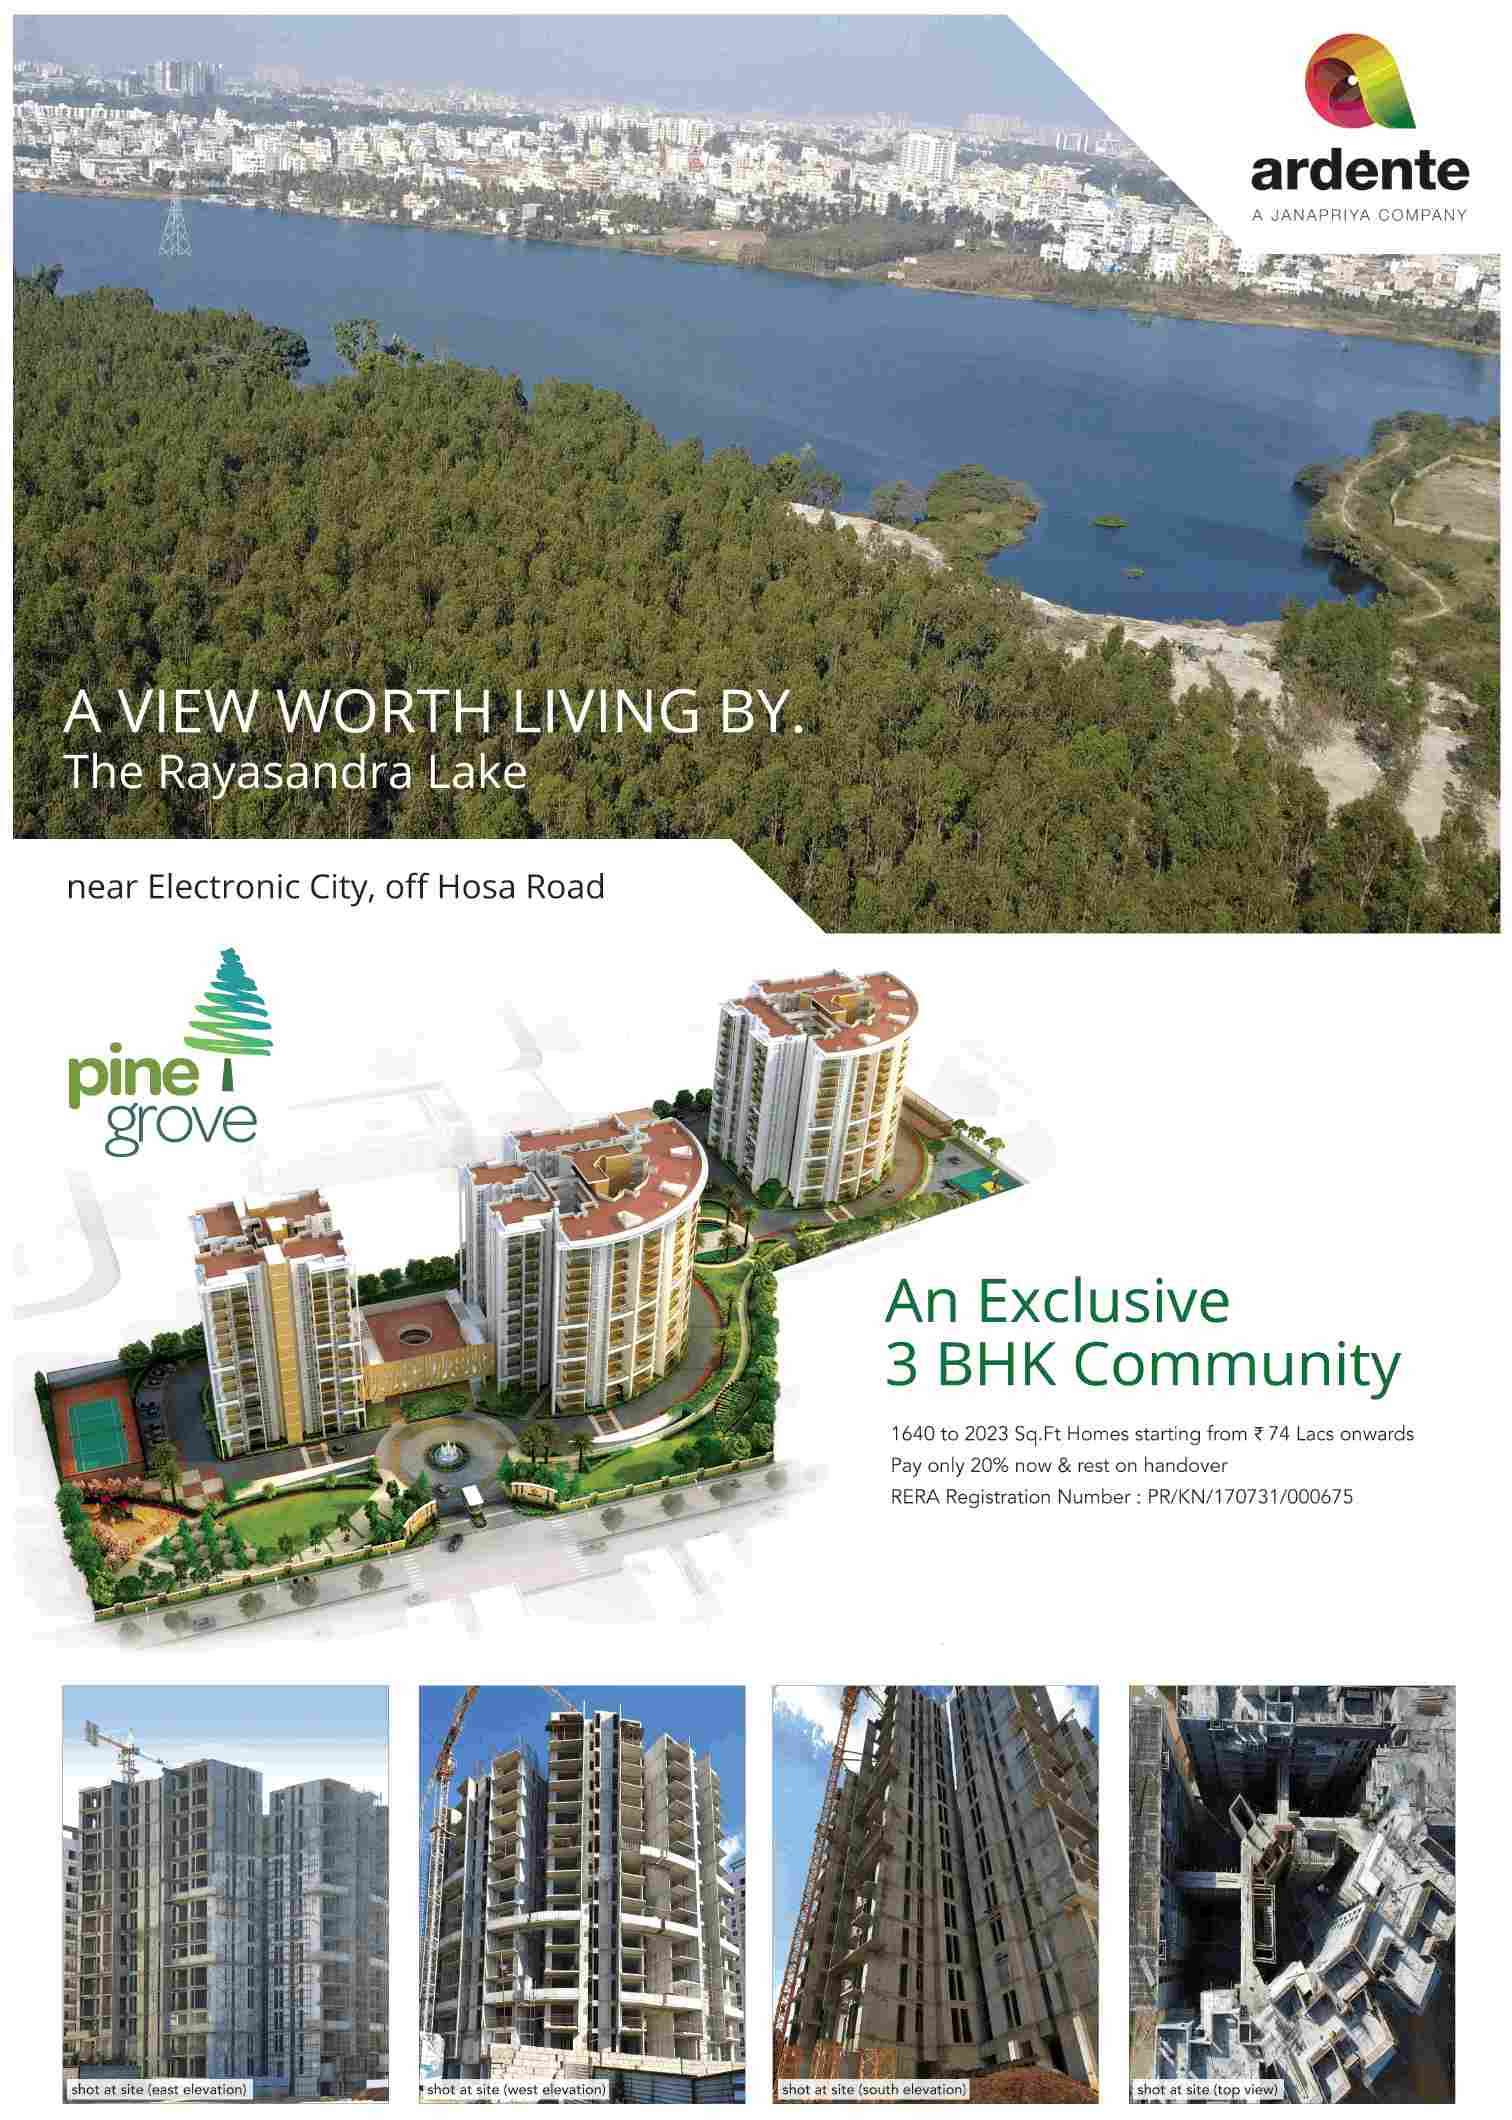 Book exclusive 3 BHK homes @ Rs 74 Lacs at Ardente Pine Grove in Bangalore